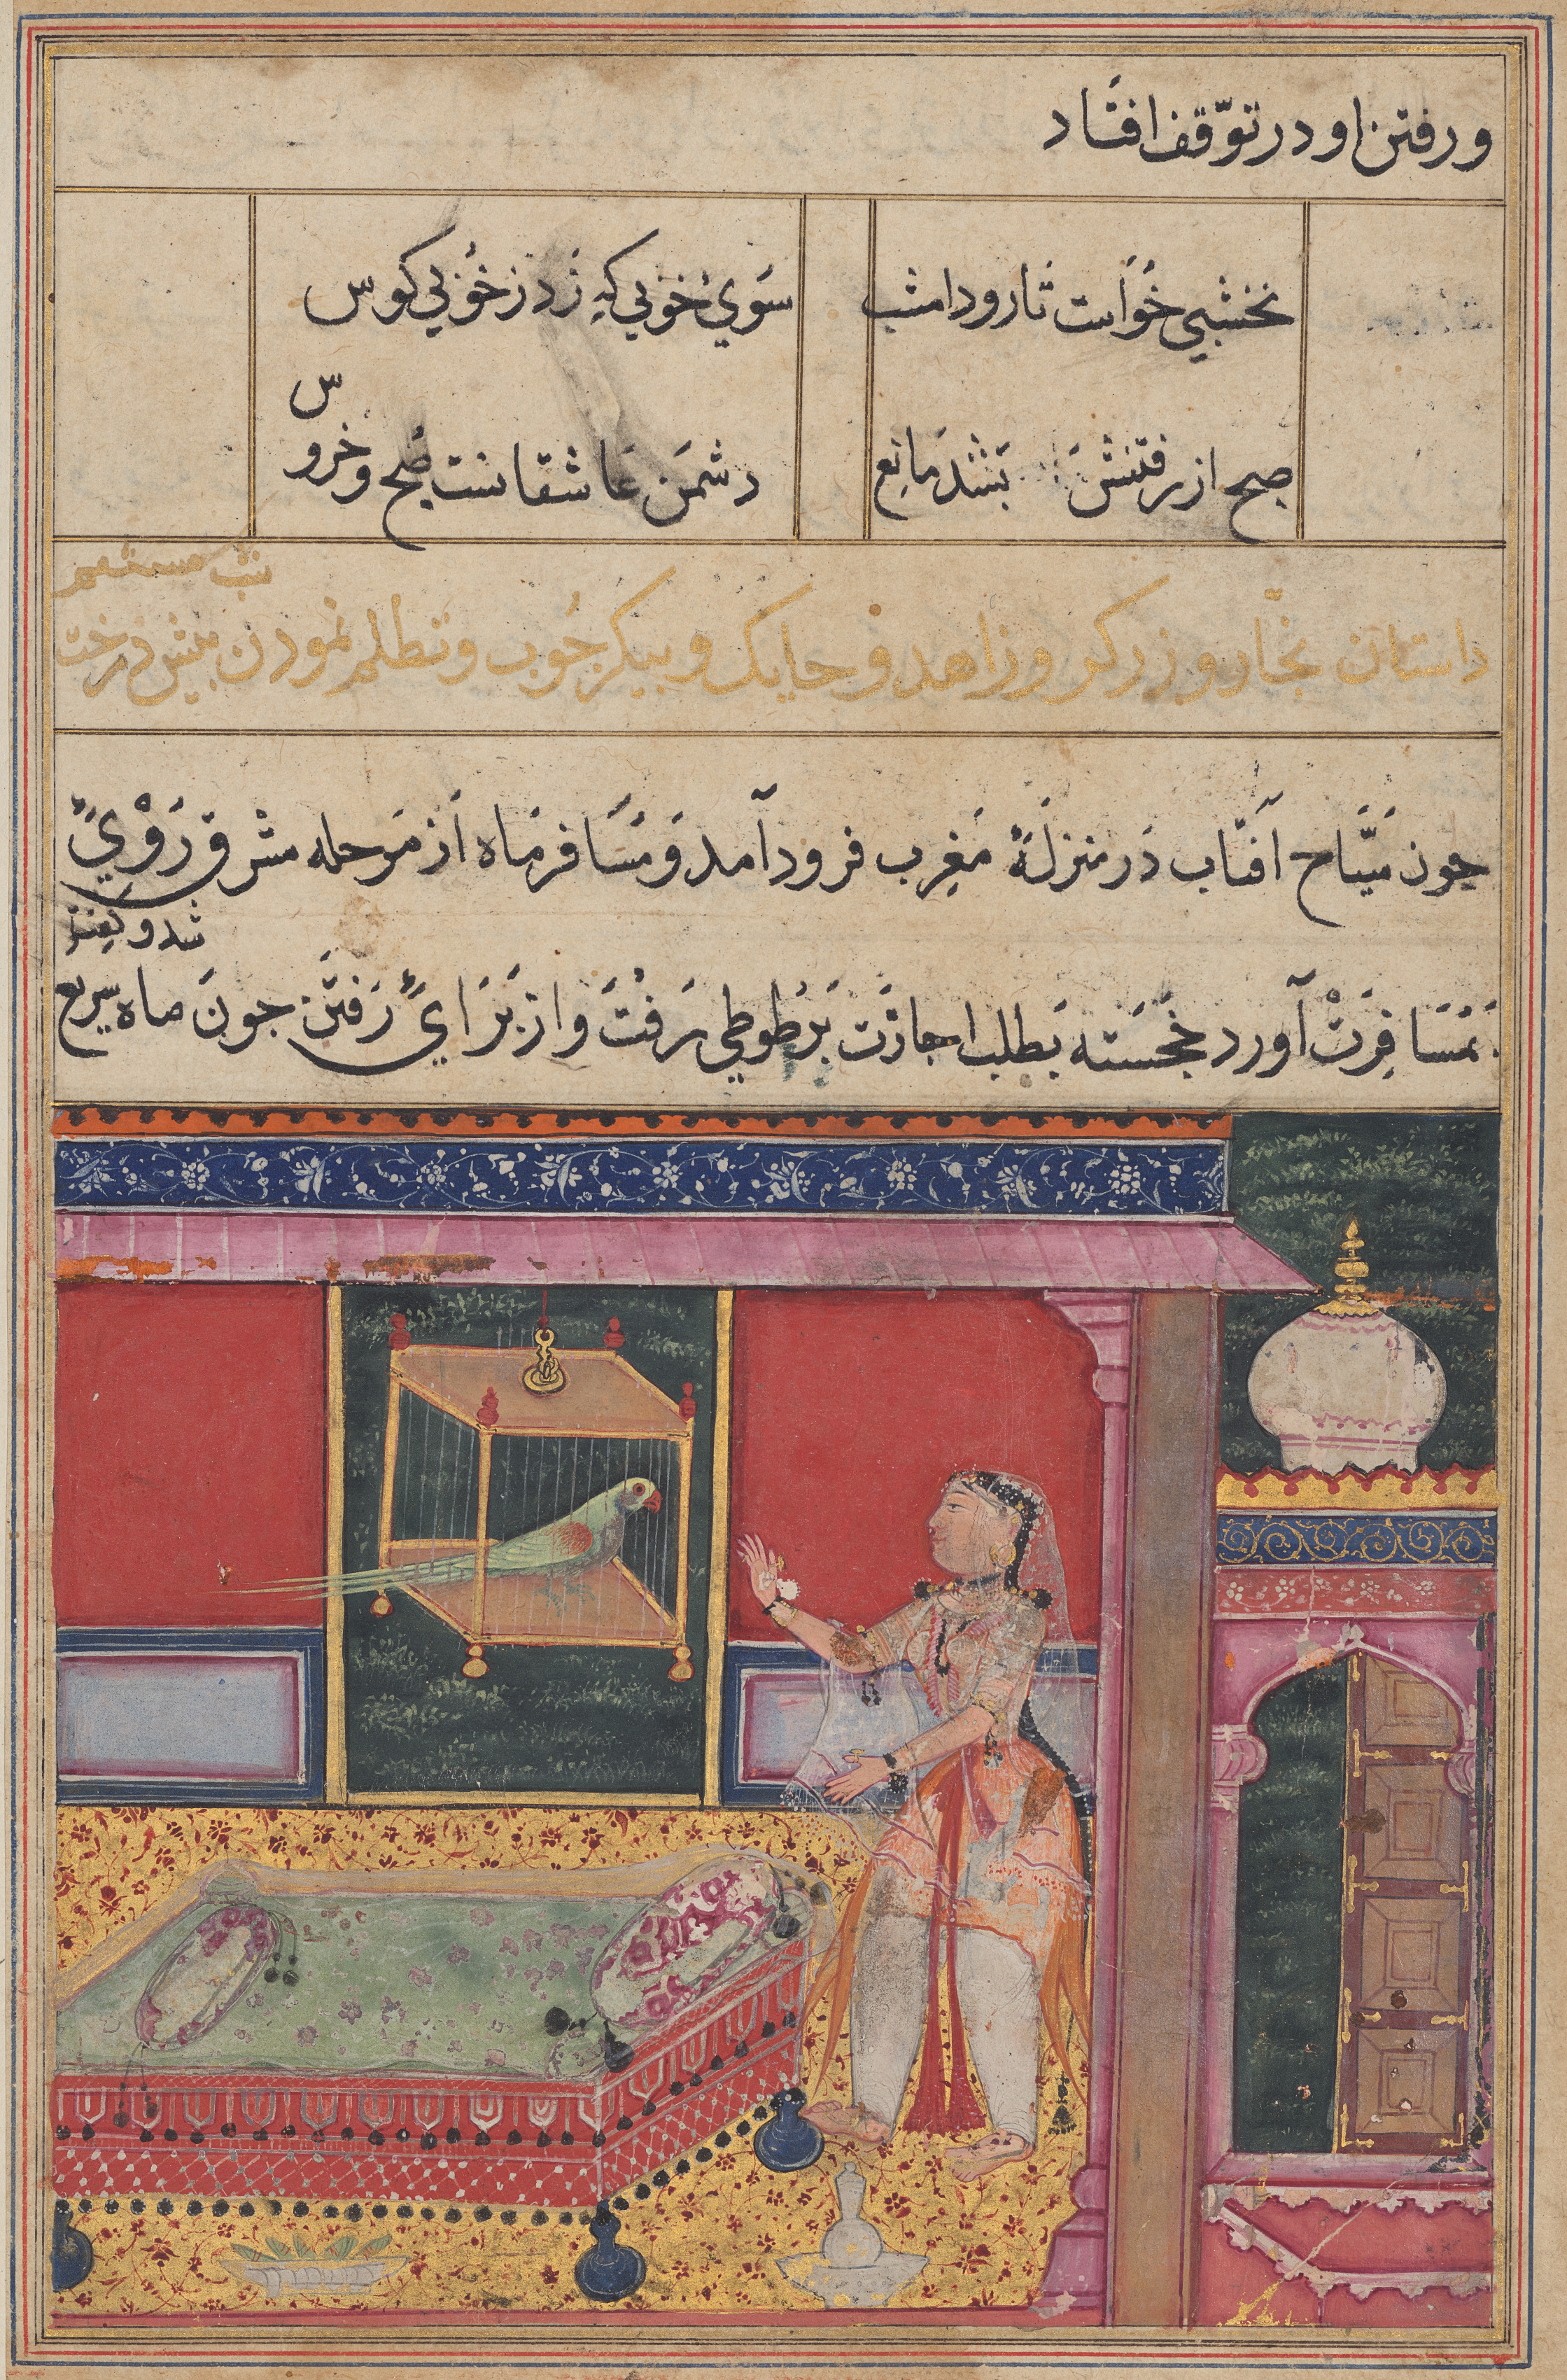 The Parrot Addresses Khujasta at the Beginning of the Sixth Night, from a Tuti-nama (Tales of a Parrot)